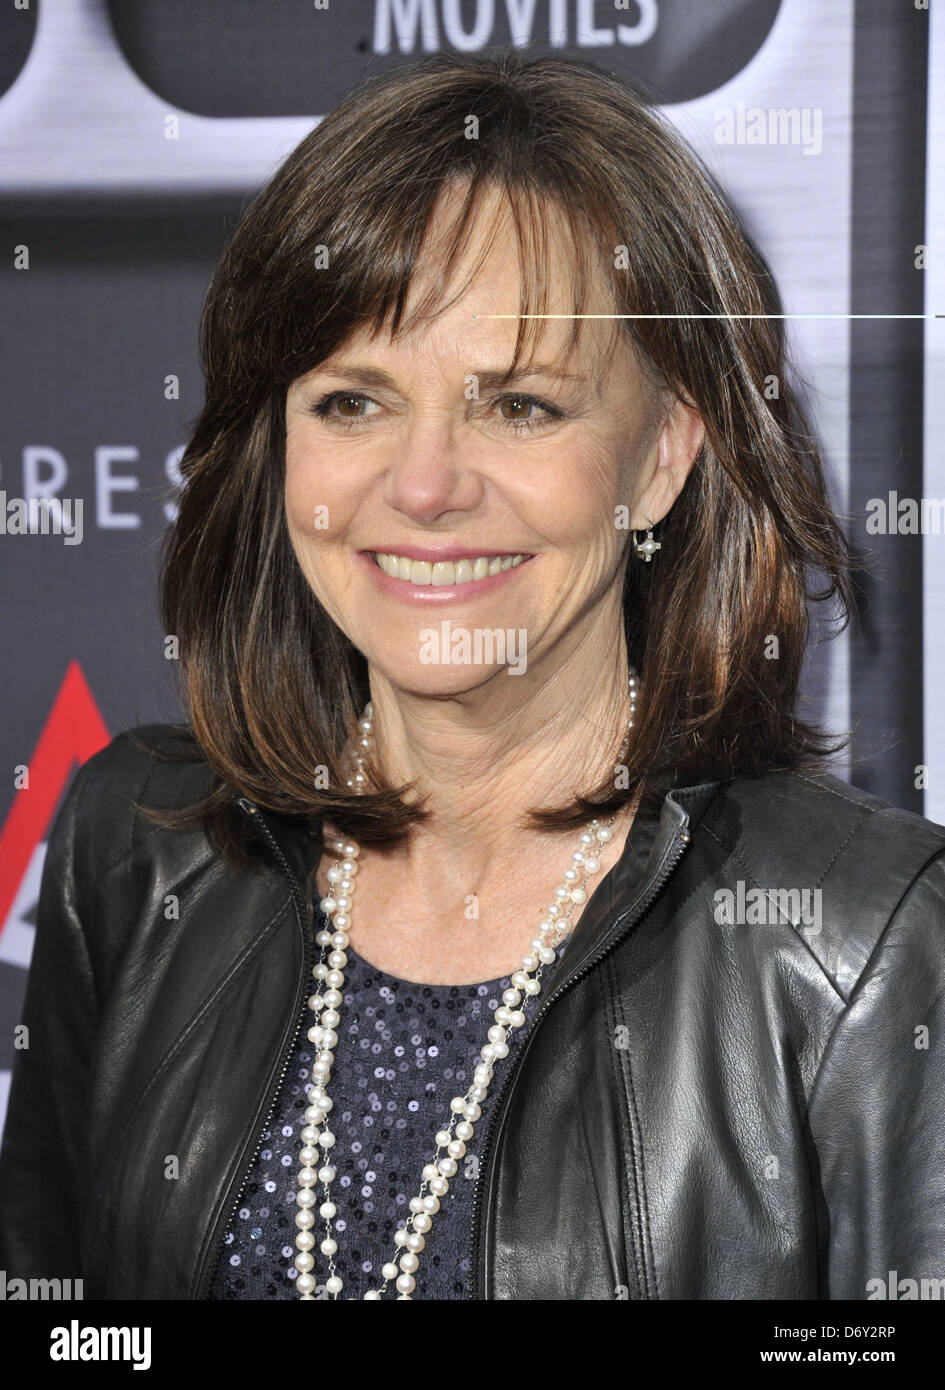 Los Angeles, California, USA. 24th April, 2013. Sally Fields attending the AFI Night at the Movies held at the Arclight Theater in Hollywood, California on April 24, 2013. 2013(Credit Image: Credit:  D. Long/Globe Photos/ZUMAPRESS.com/Alamy Live News) Stock Photo